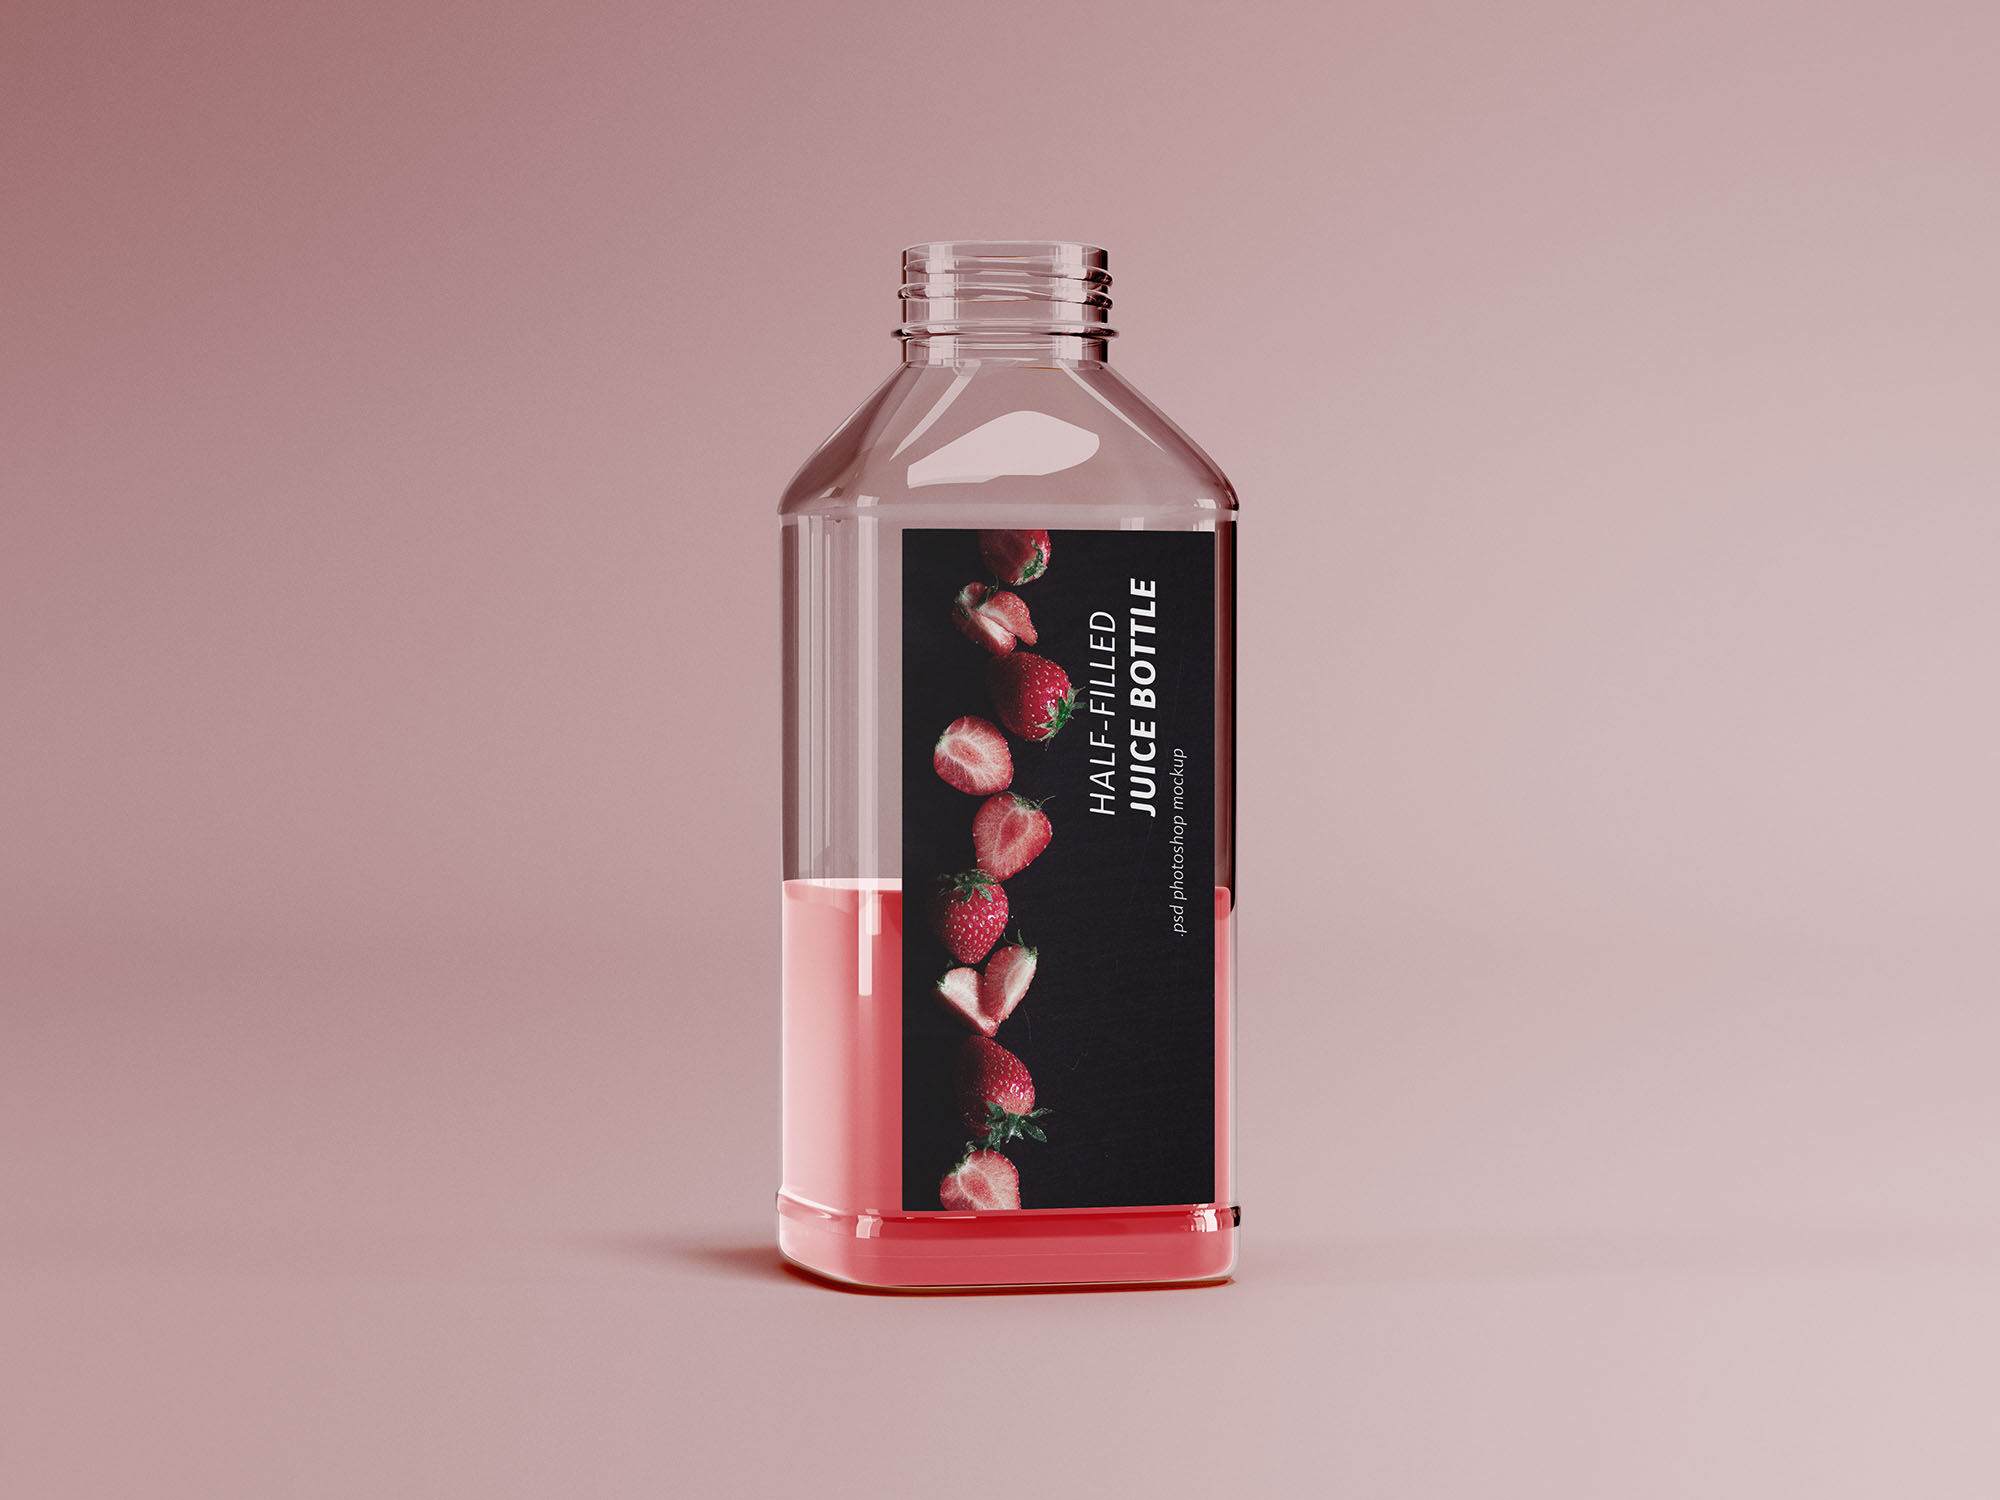 Mockup Featuring the Front view of a Half Filled Juice Bottle FREE PSD